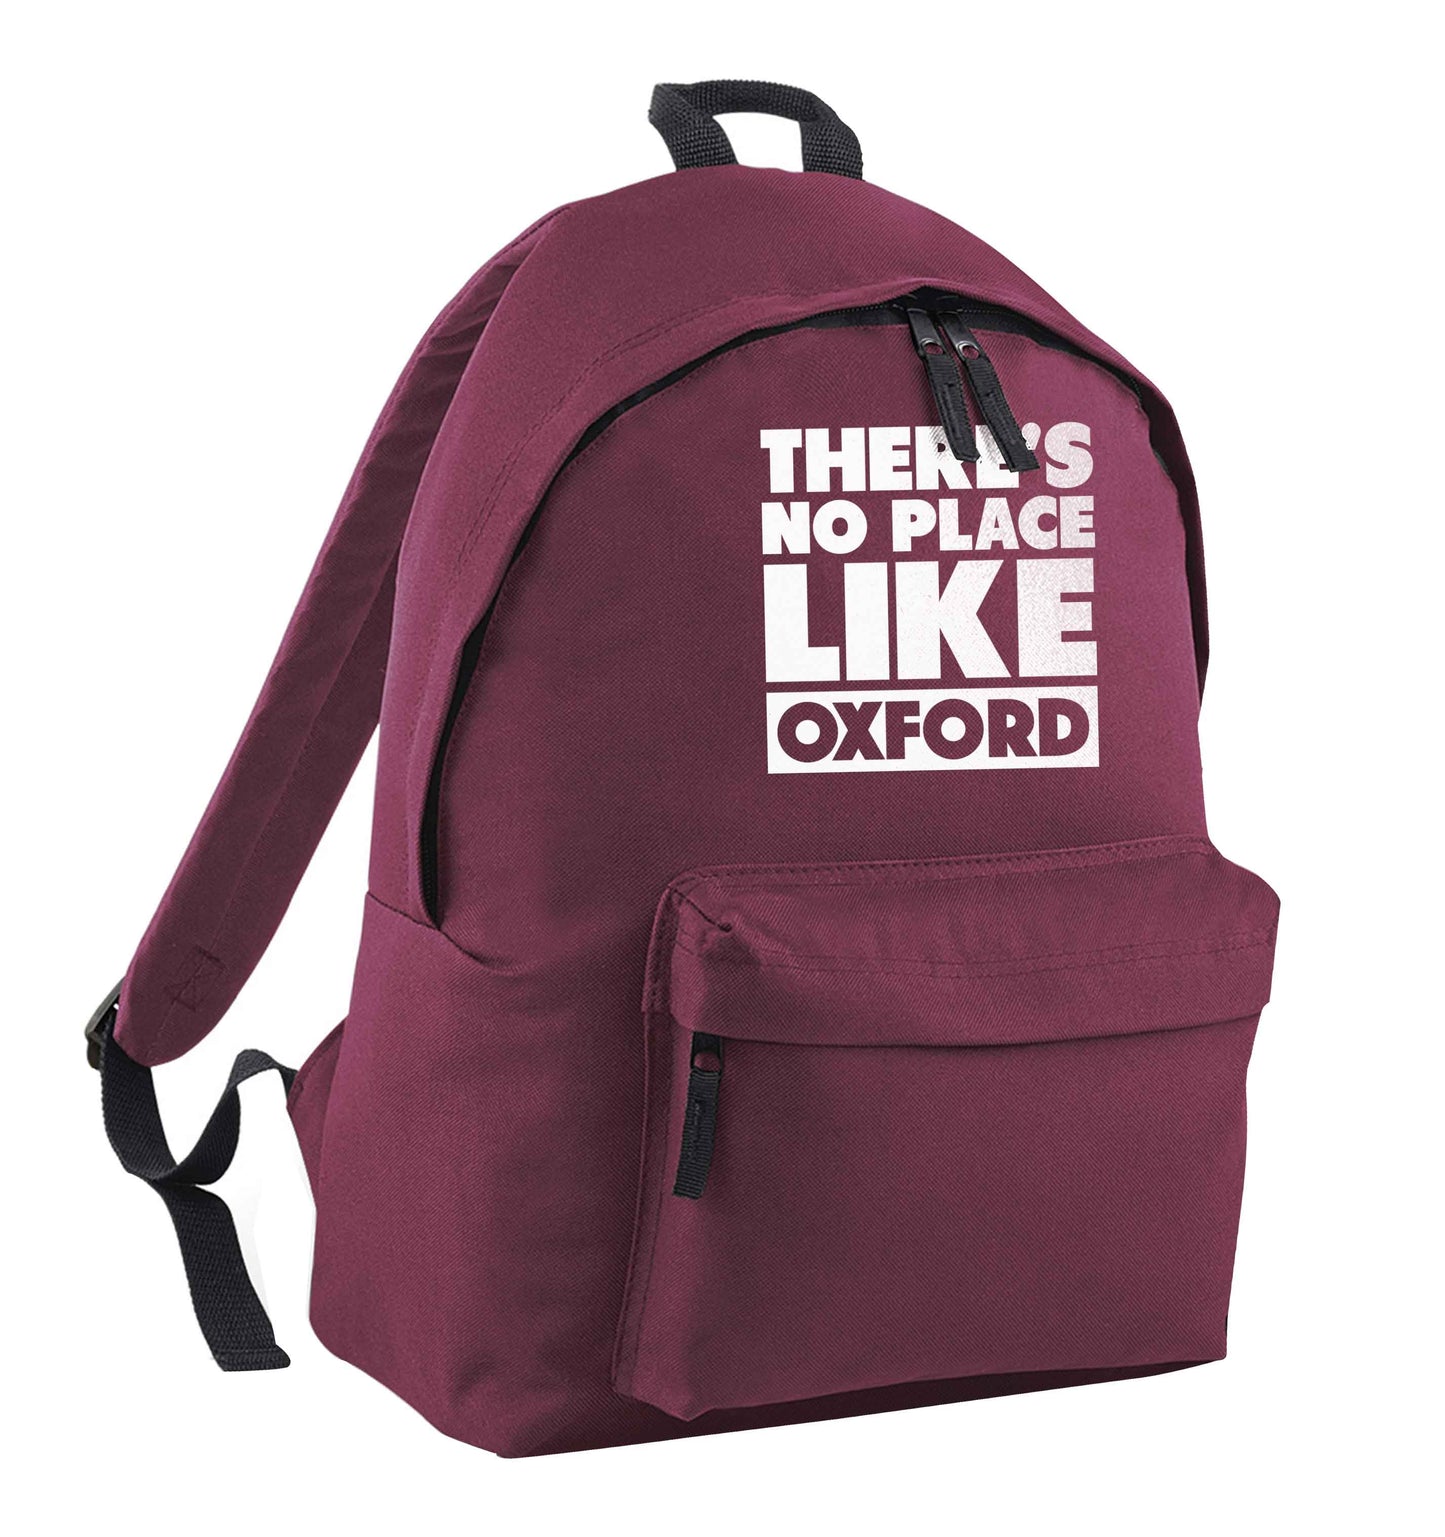 There's no place like Oxford maroon adults backpack